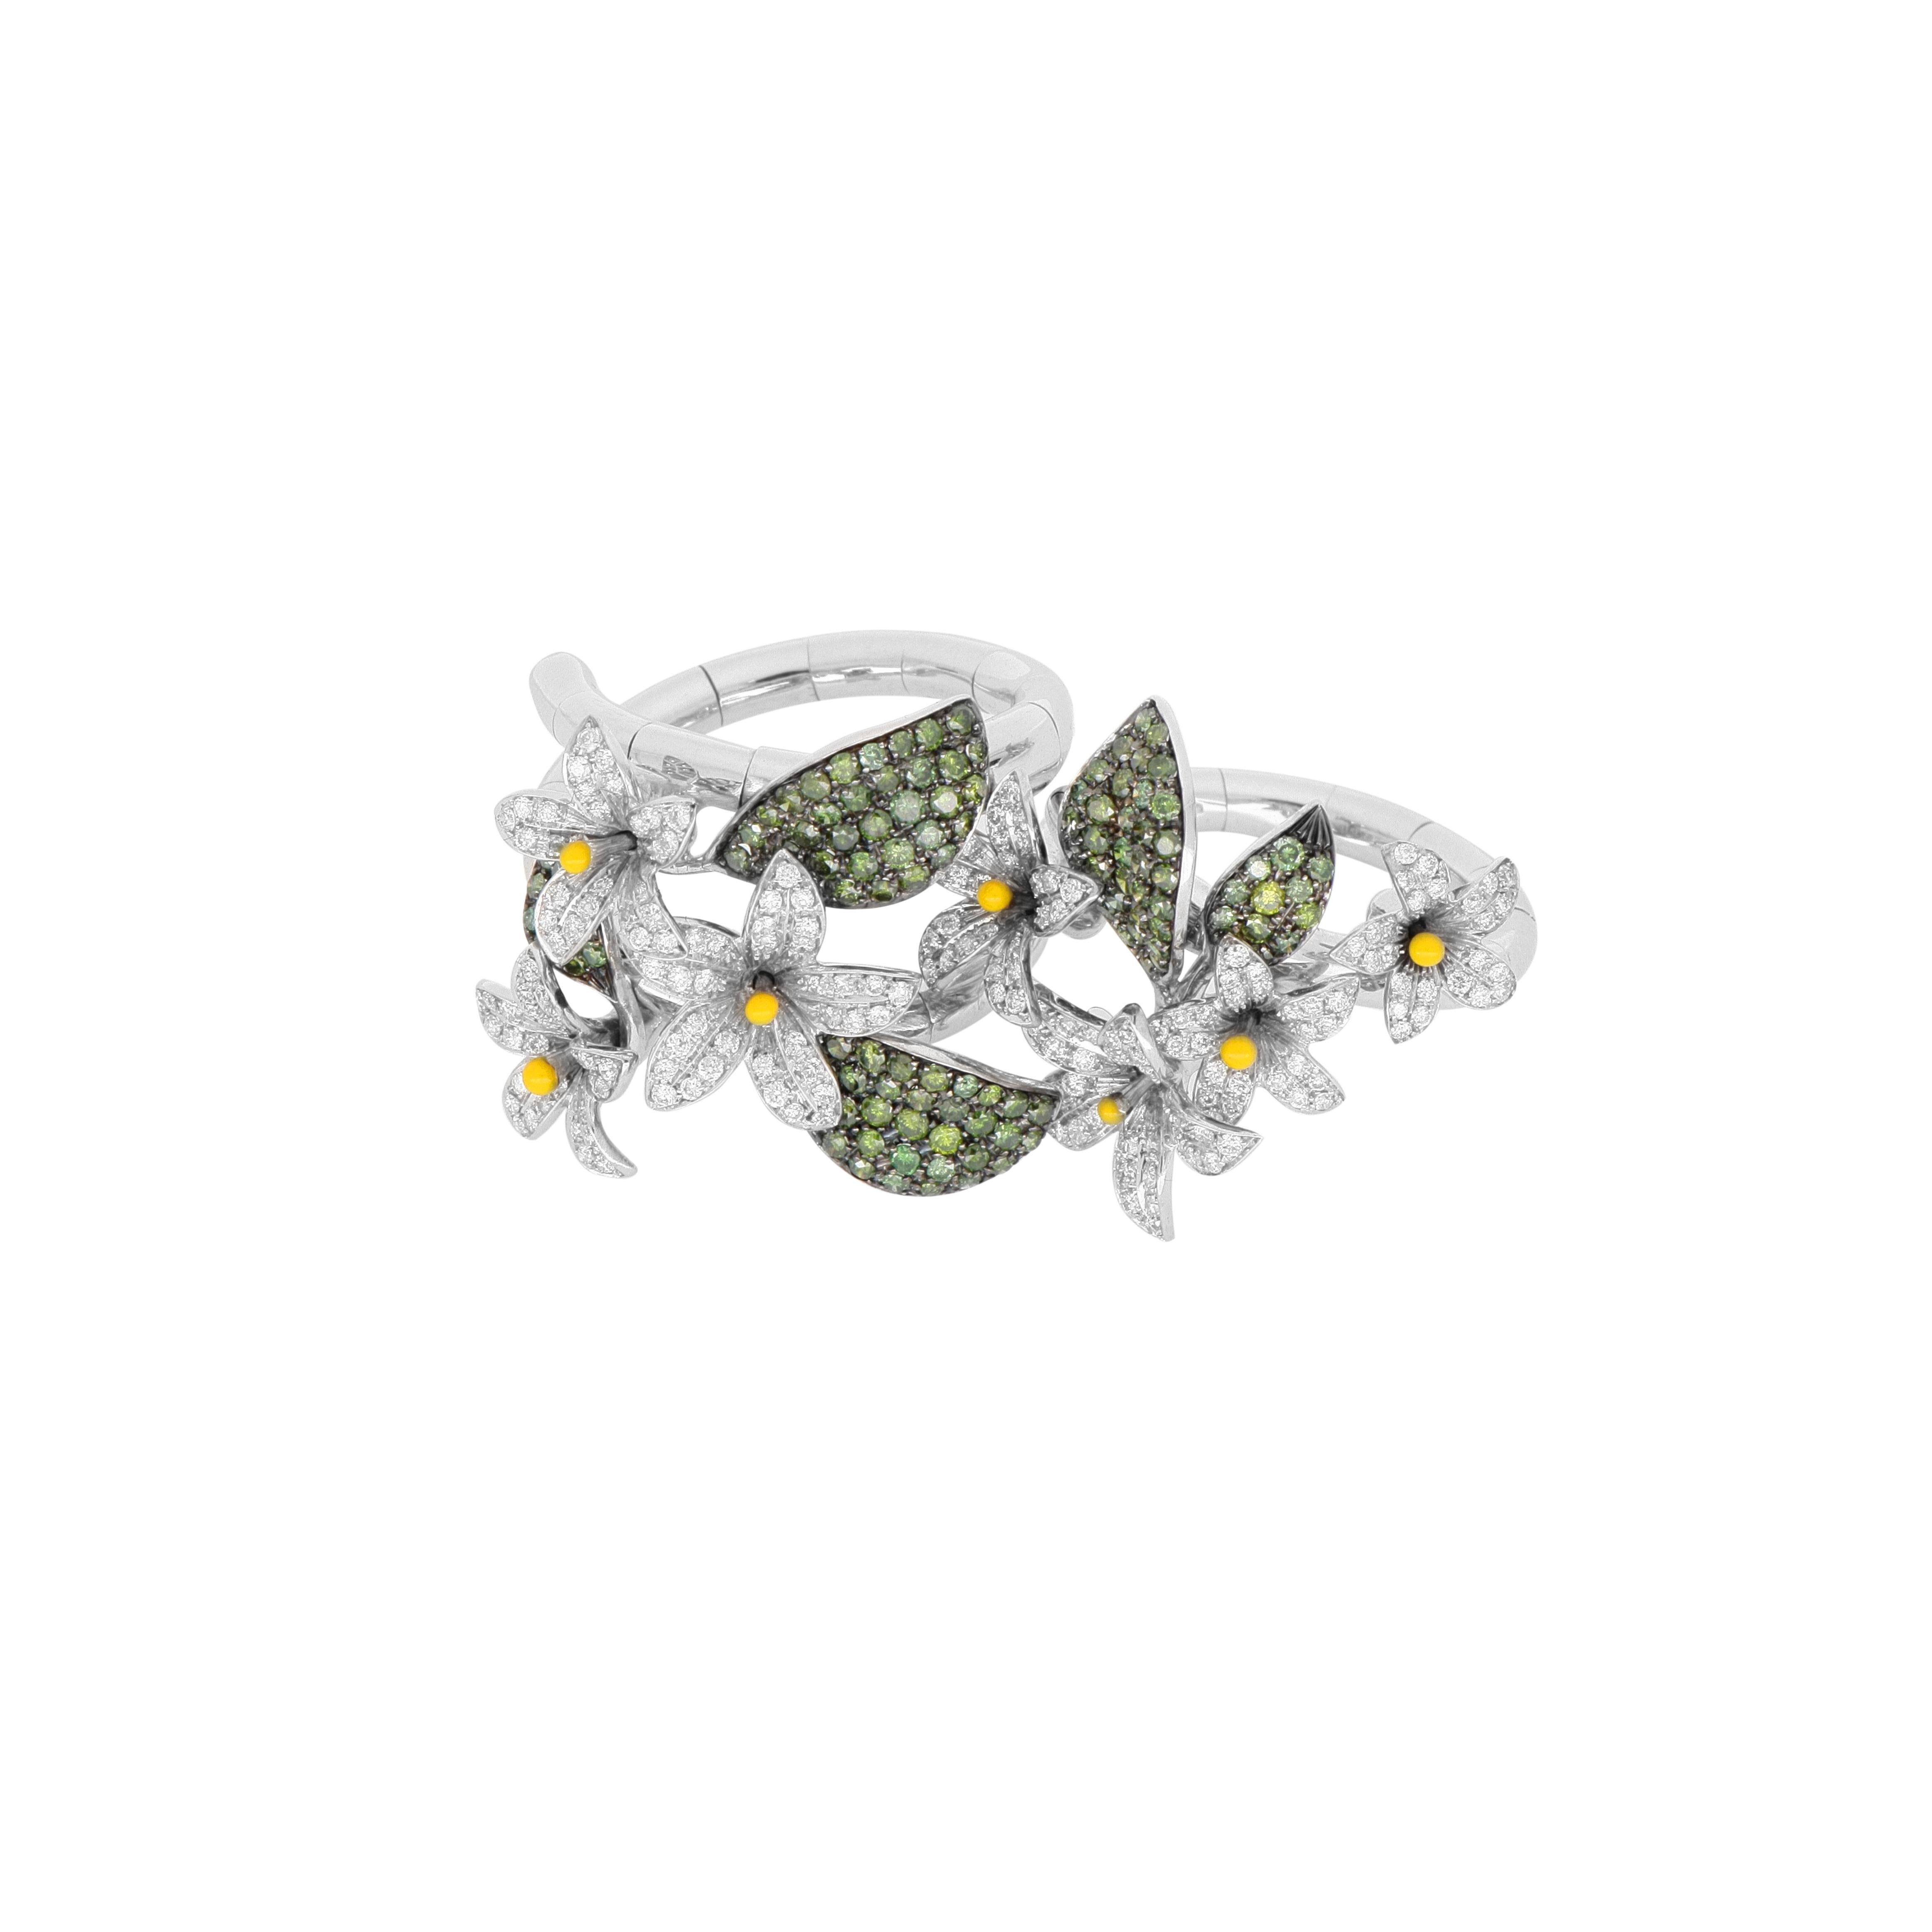 Crafted in 18Kt white gold, this beautiful spiral ring is inspired by Arabian Star Flowers. It features multiple diamond-pavé flowers and green diamond leaves. Perfect if you're after a fresh, cheerful look for spring and summer. For a matching set,